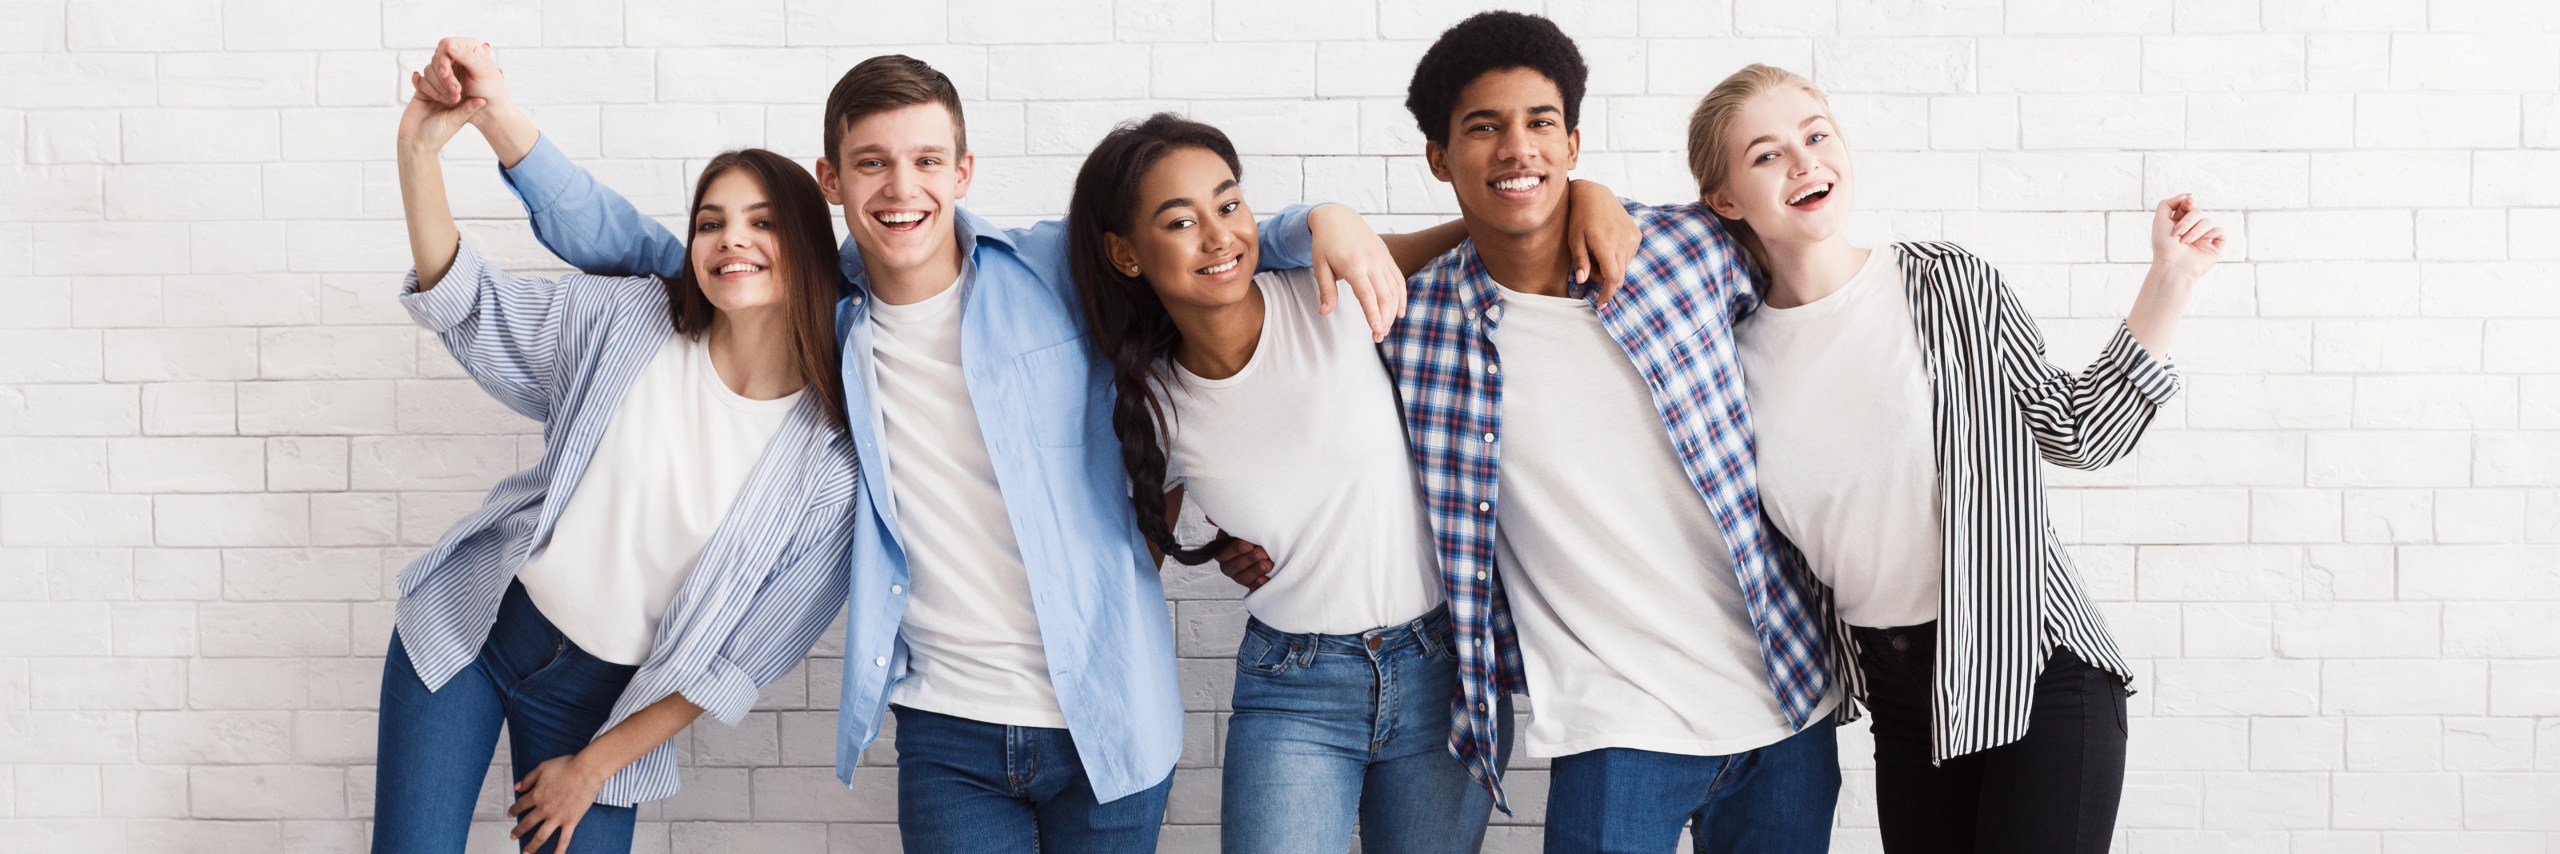 Group of teens standing, smiling and laughing with their arms over each other's shoulders.